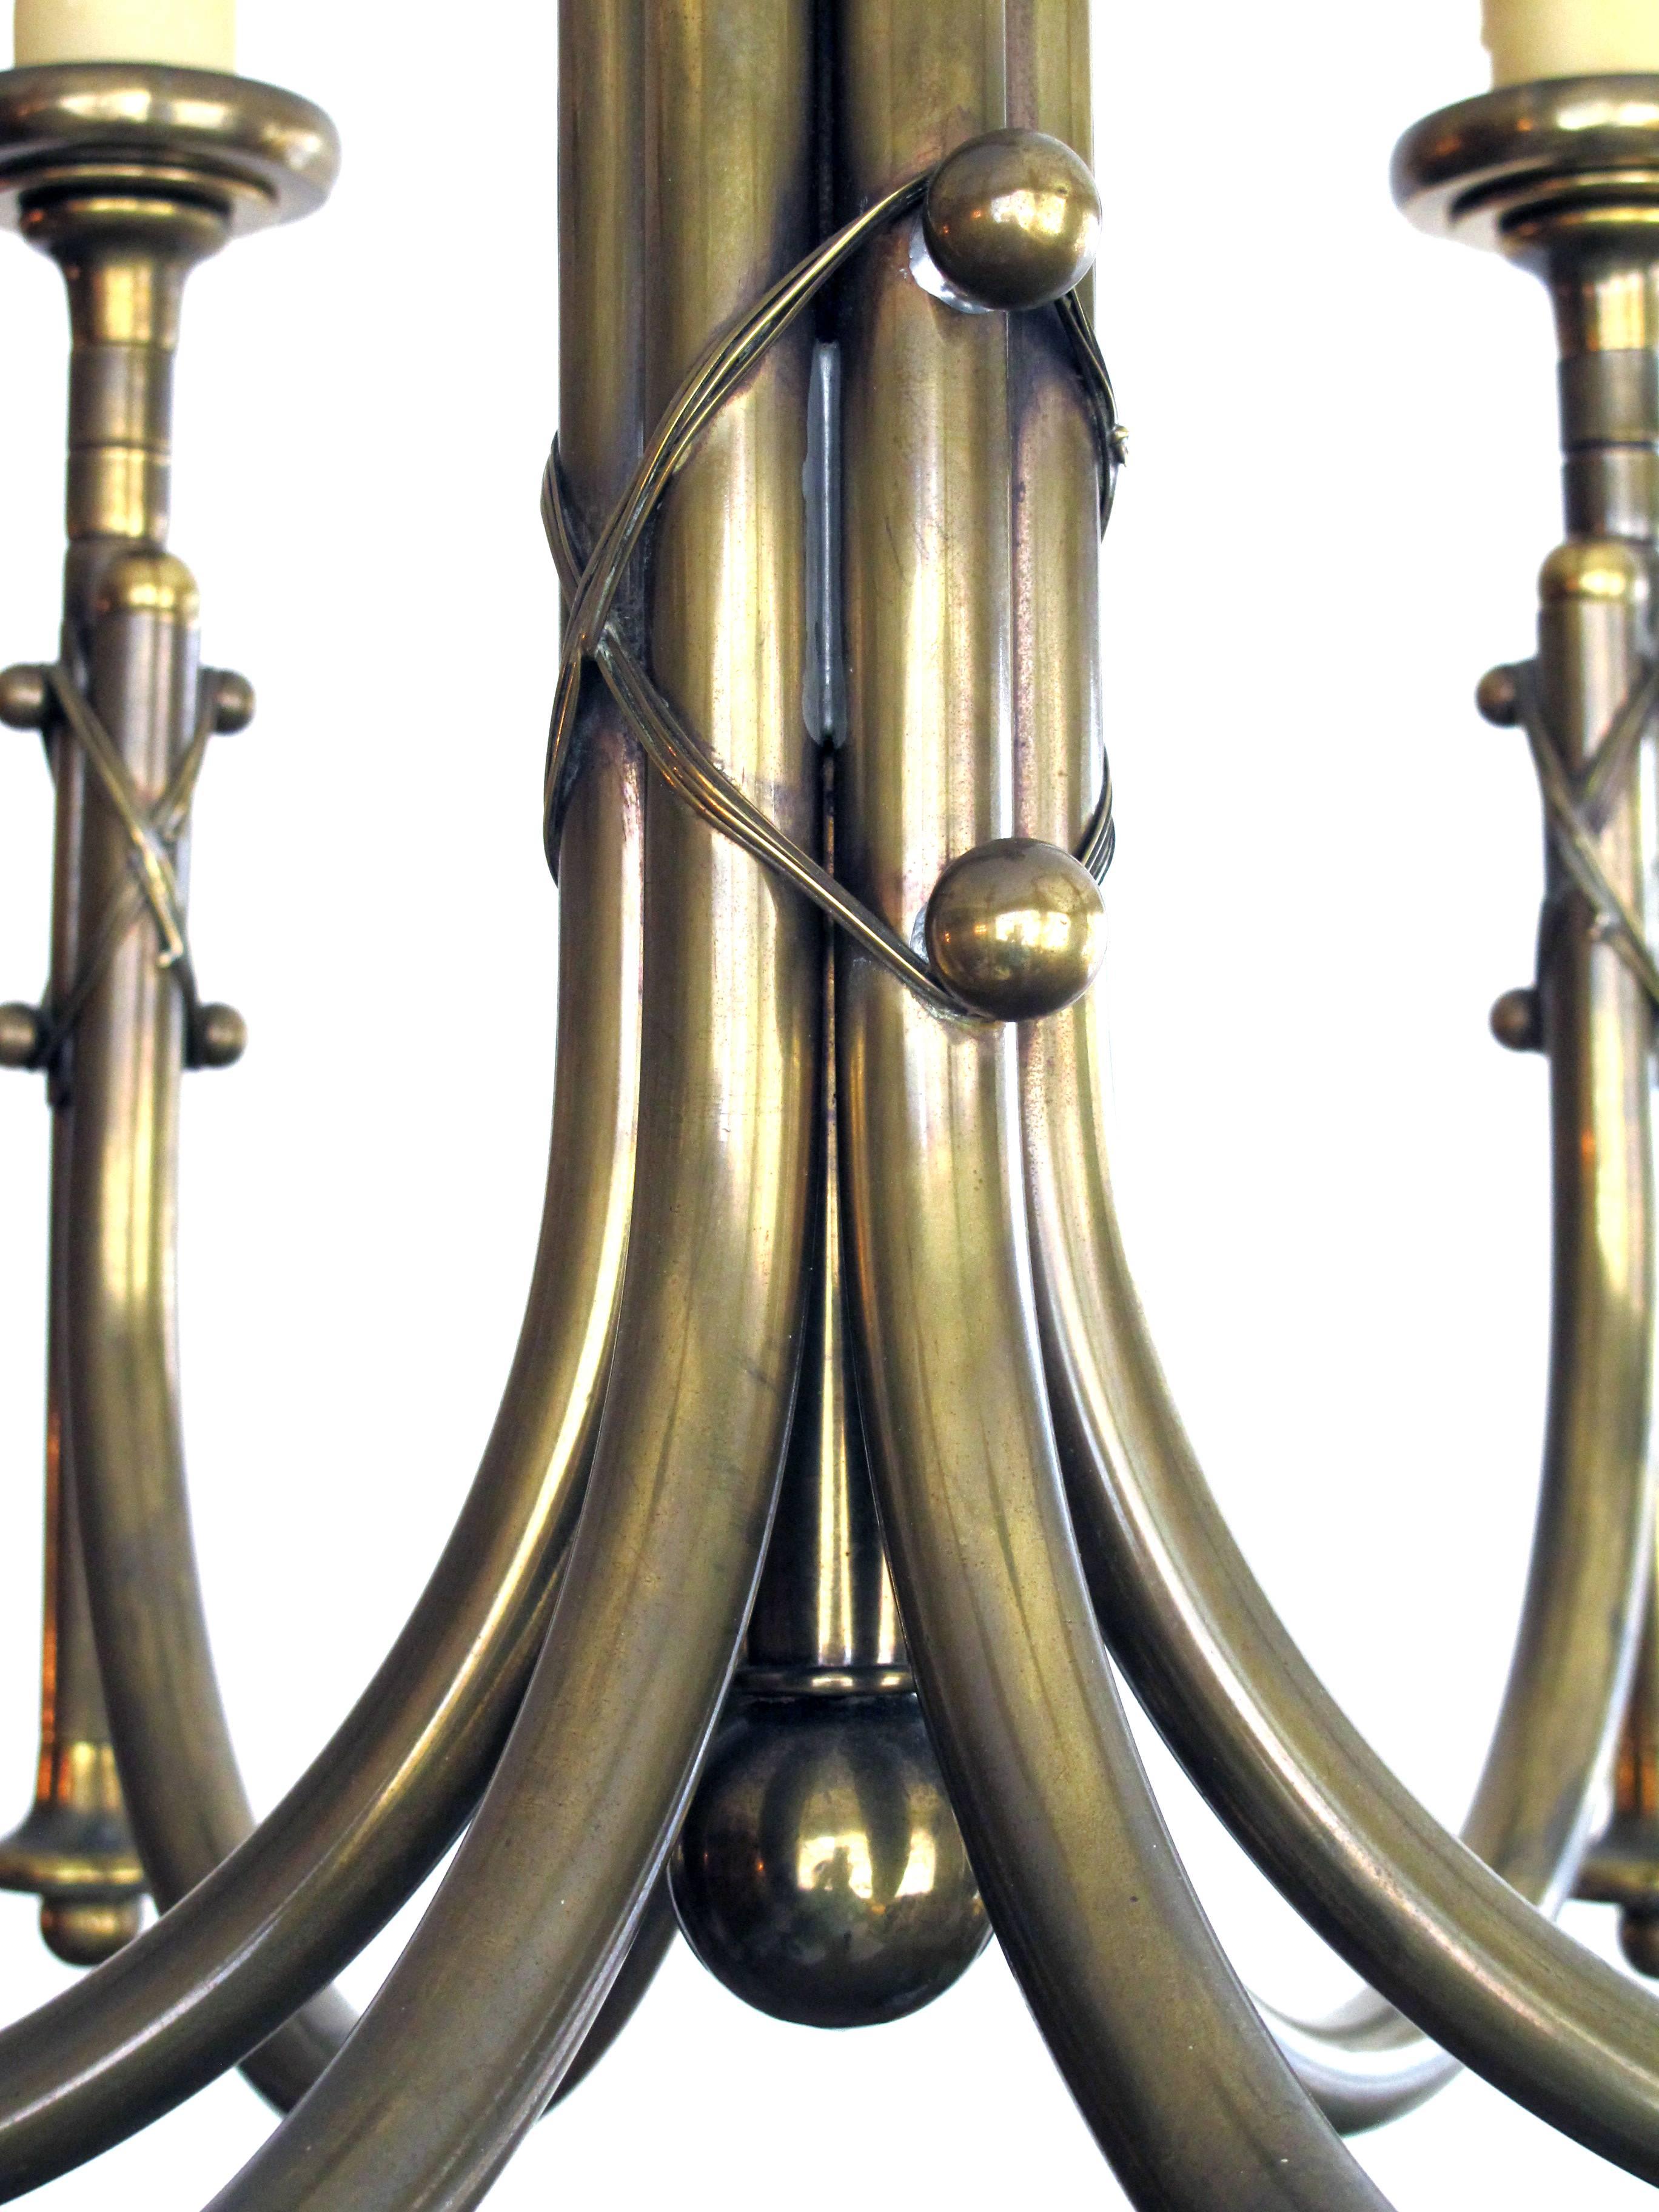 The central cluster column support emanating six scrolled arms supporting upright torches; adorned overall with brass strap-work and spheres